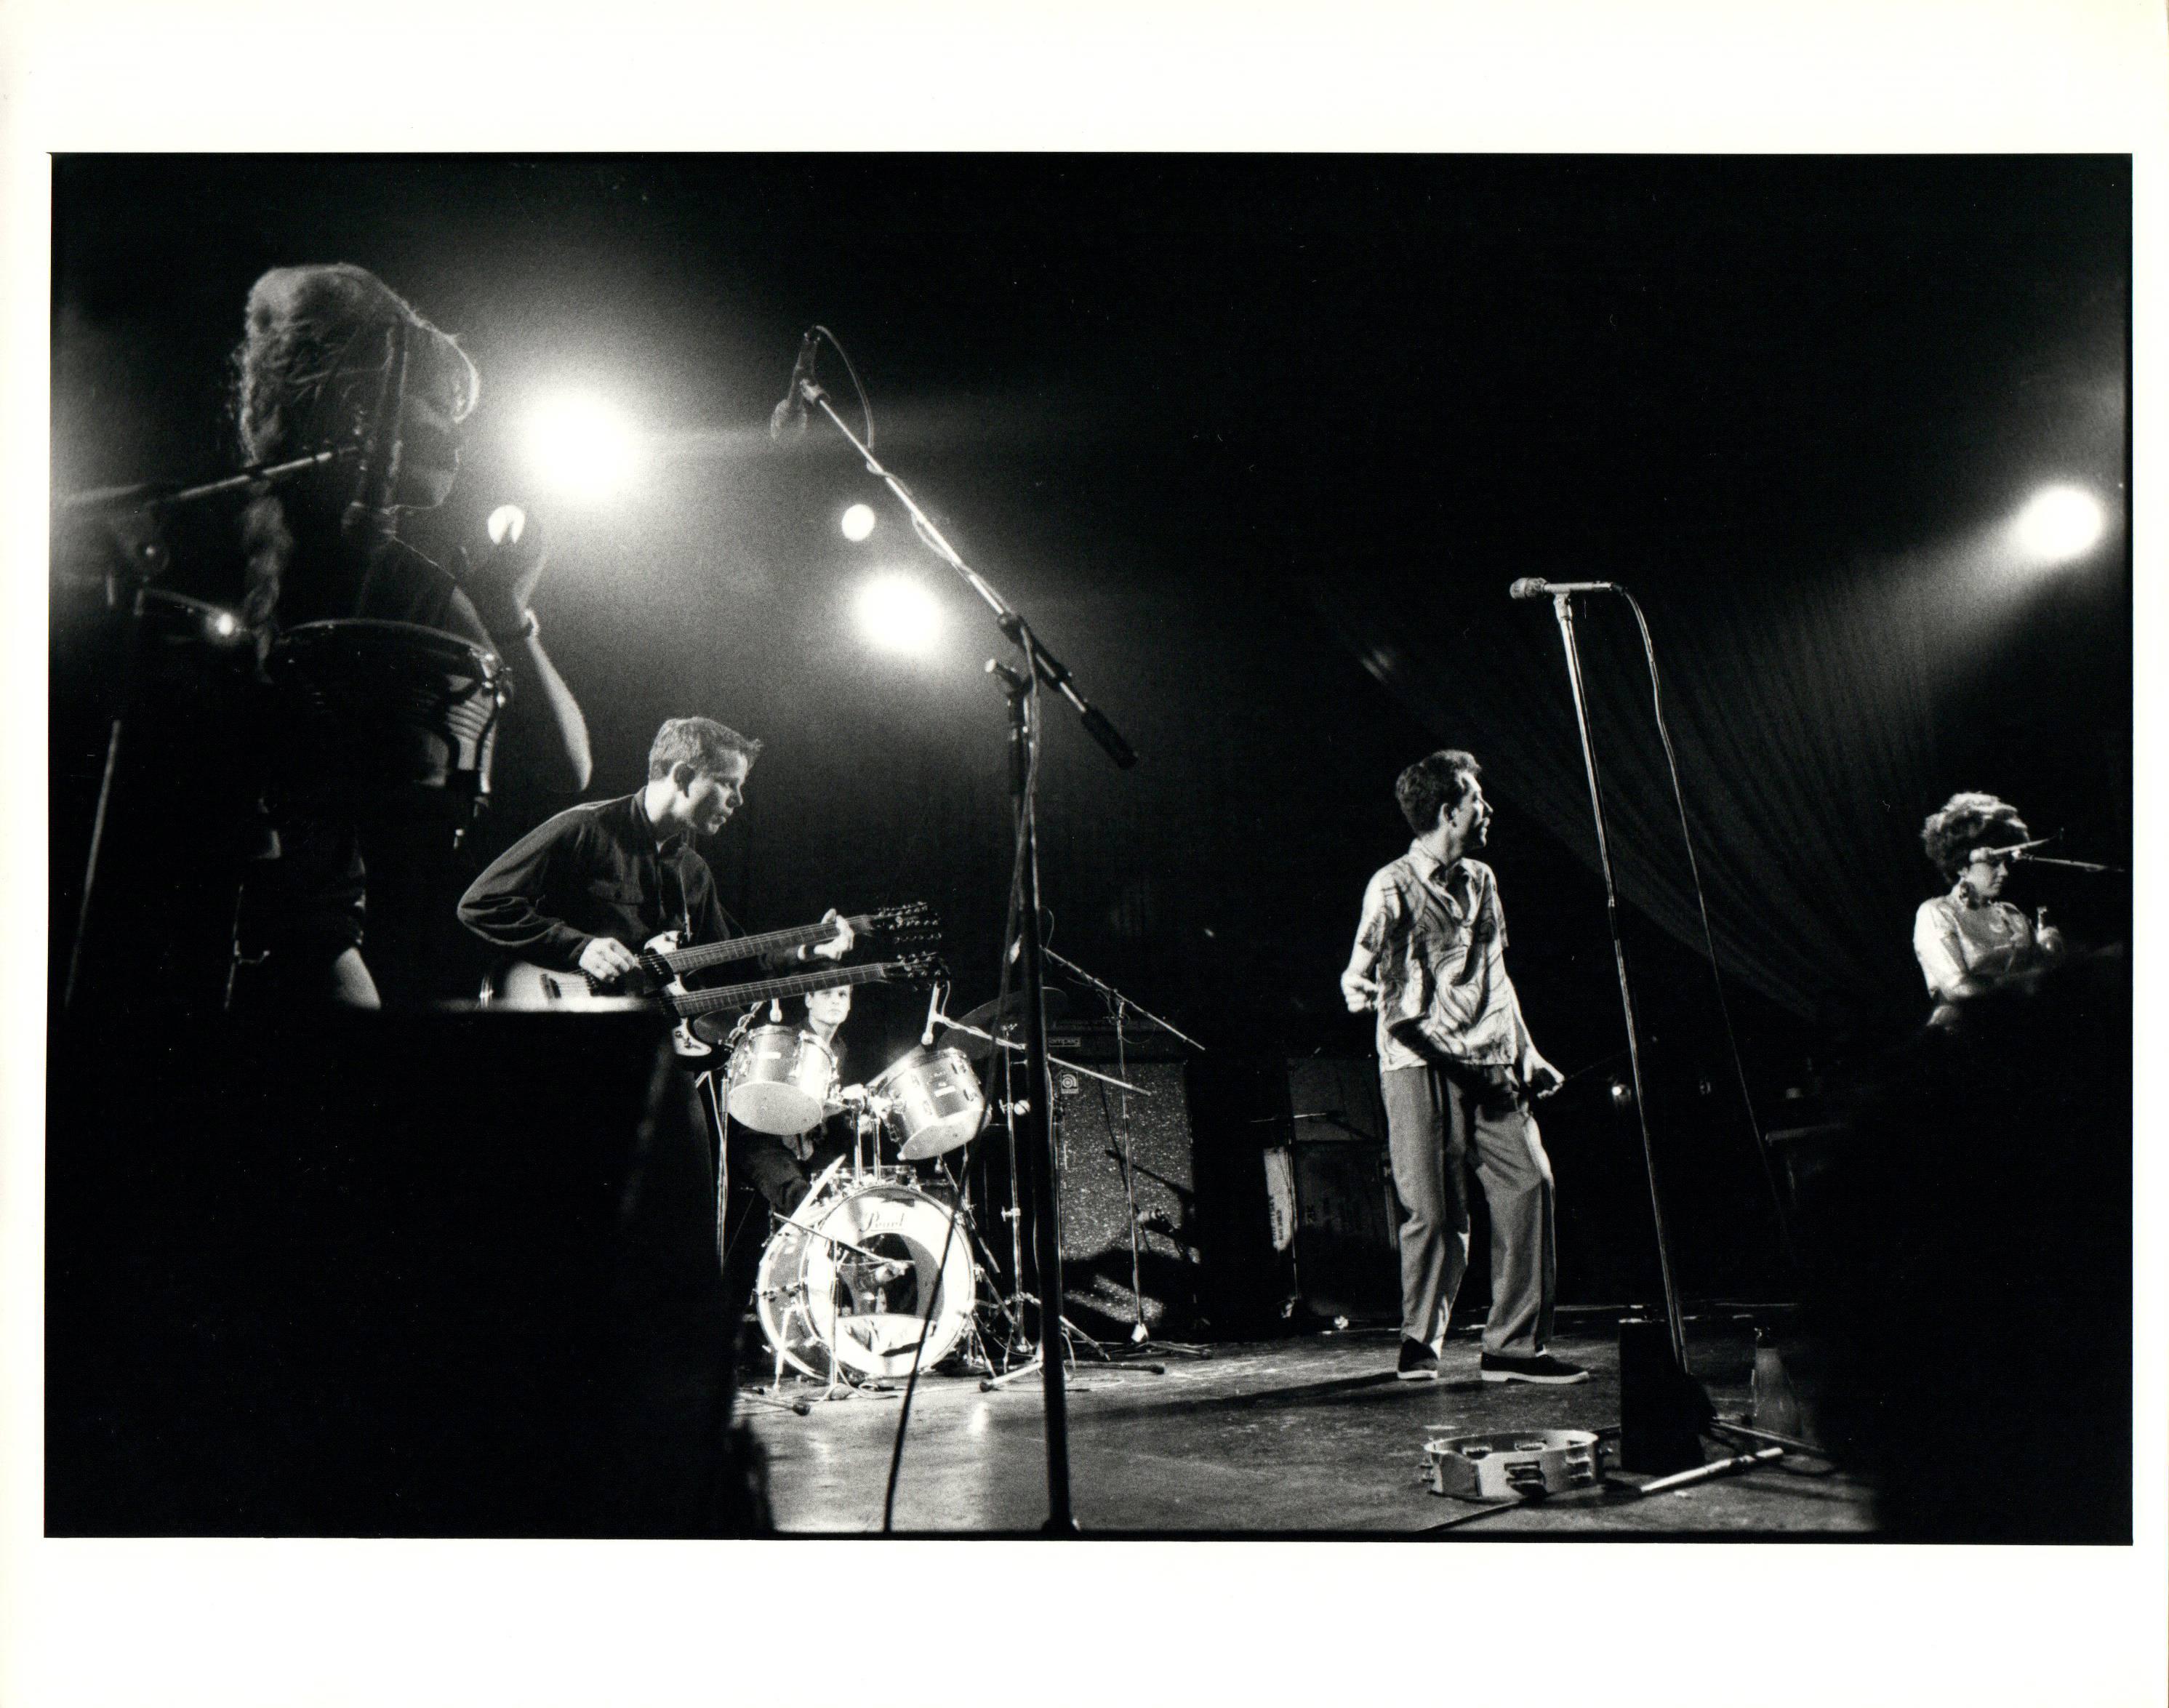 Paul Canty Black and White Photograph - The B-52s on Stage Vintage Original Photograph